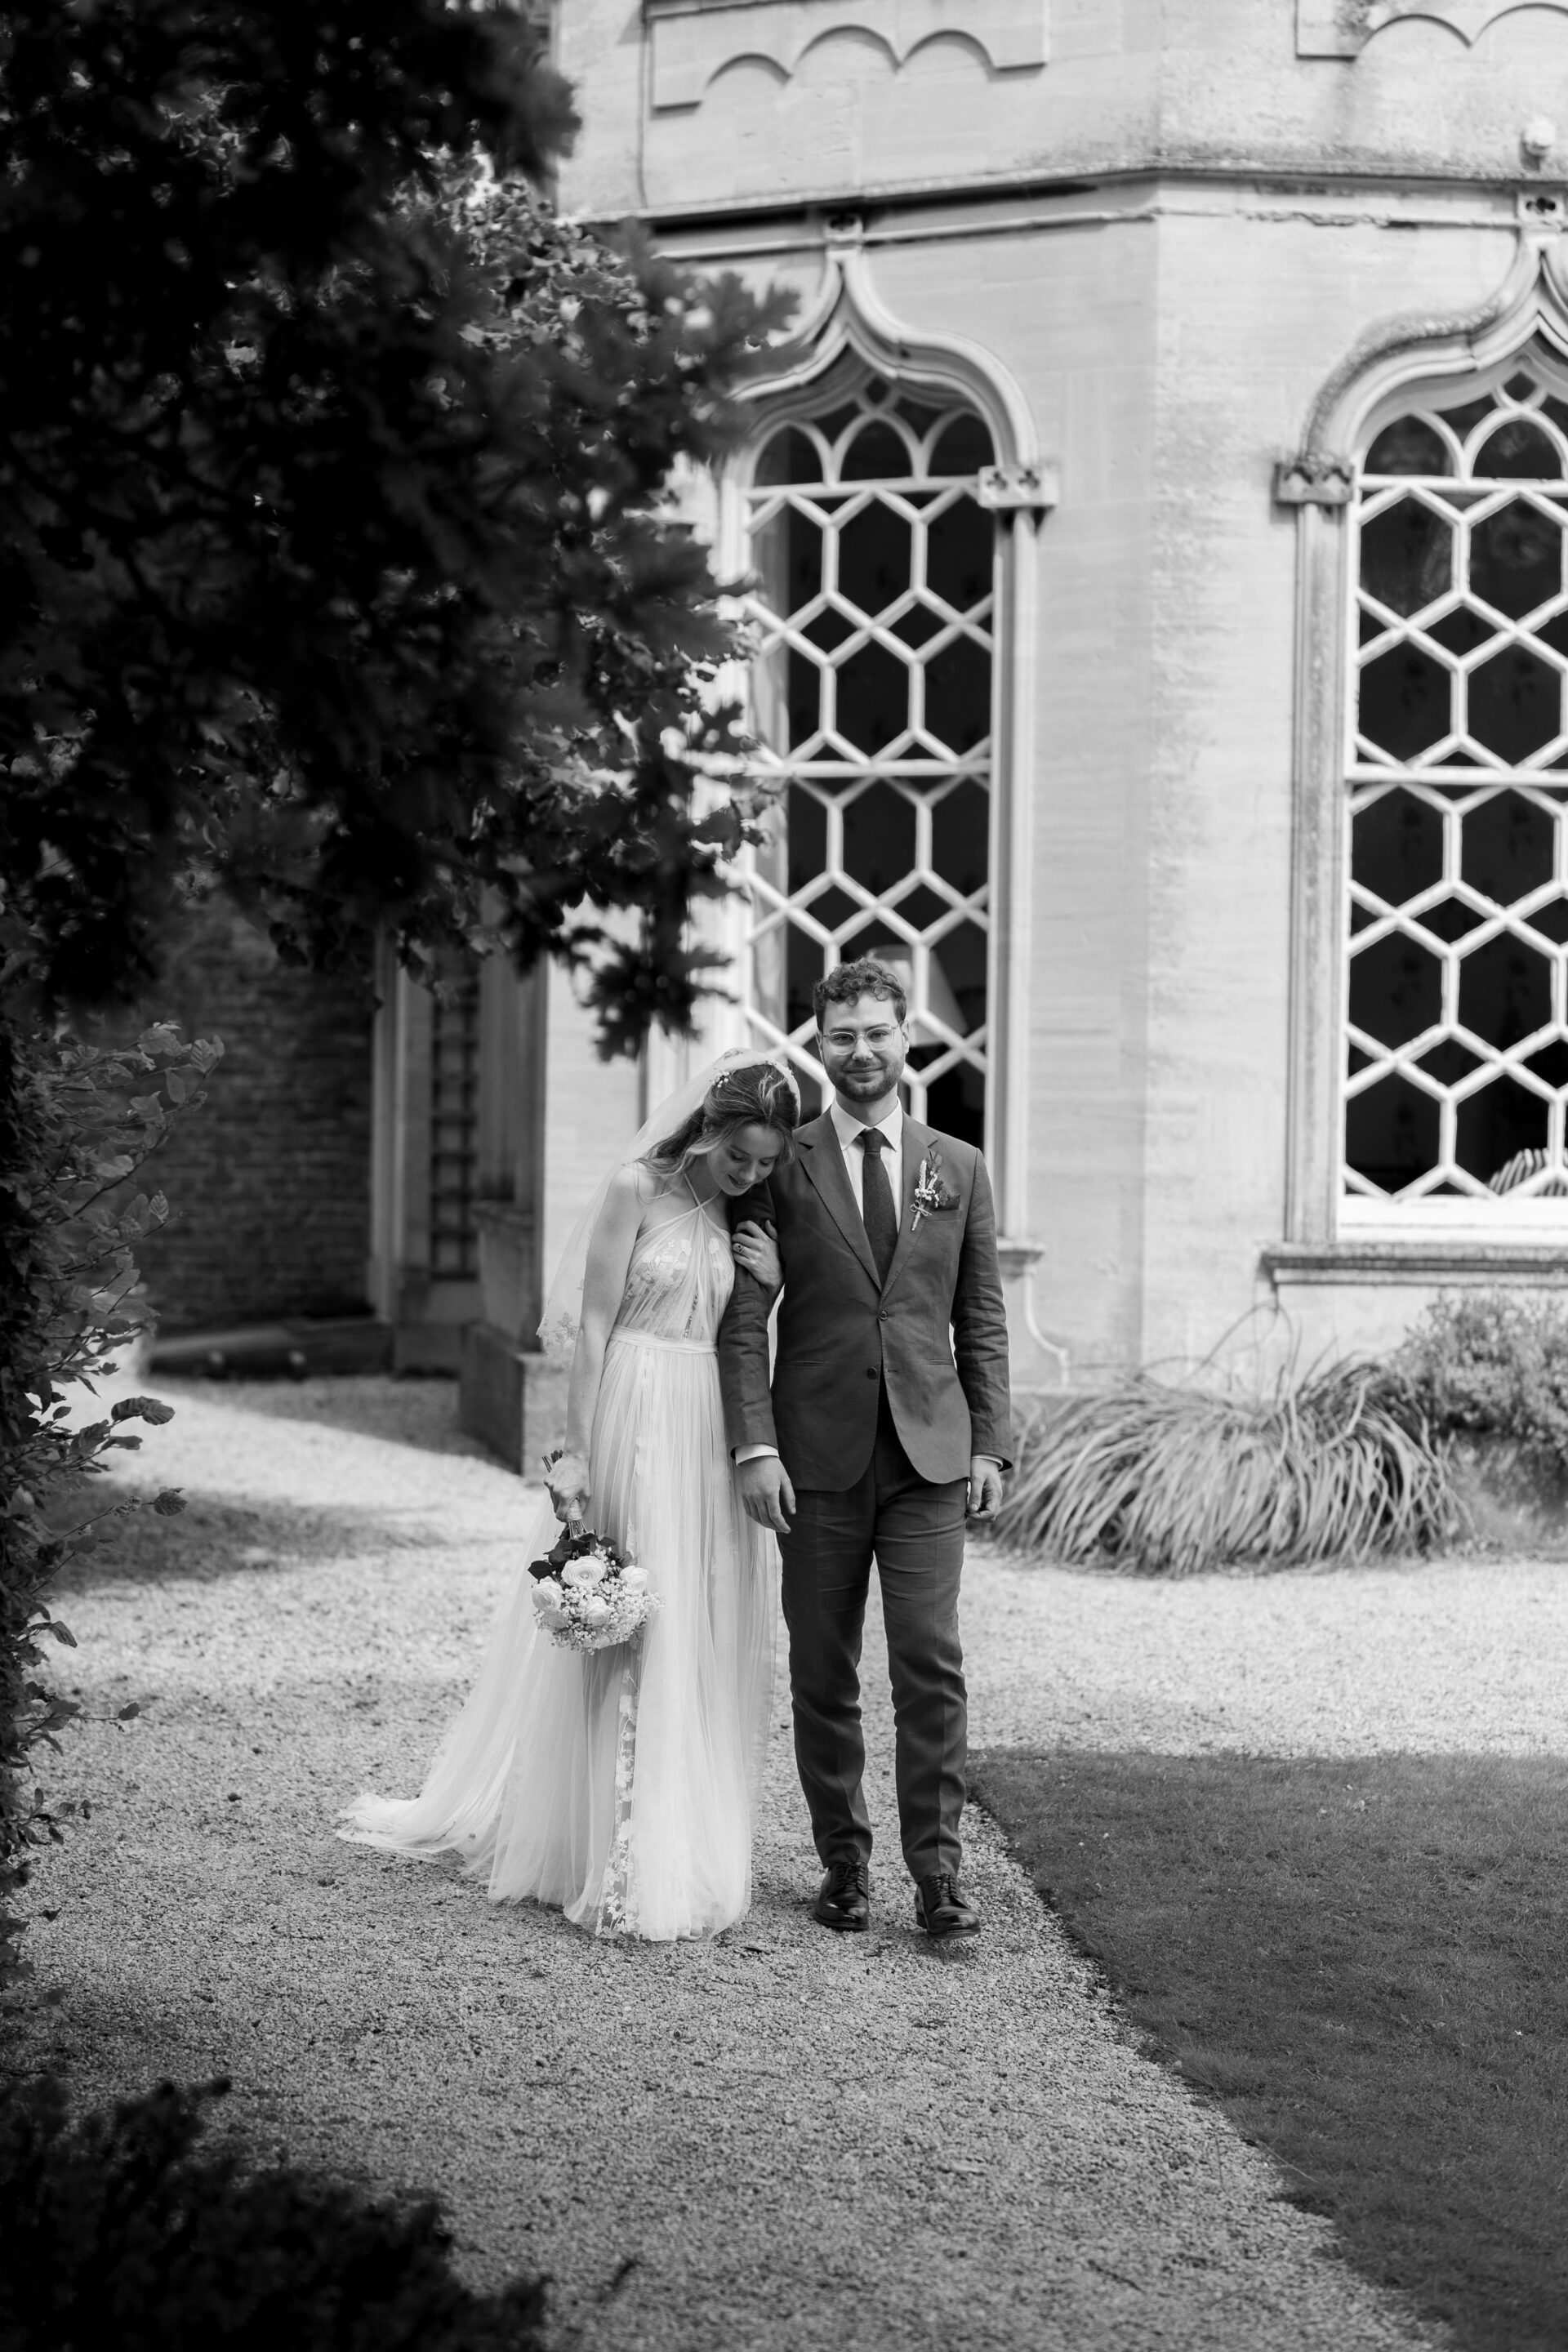 The bride and groom walk arm in arm at Frampton Court Estate, Gloucestershire wedding venue